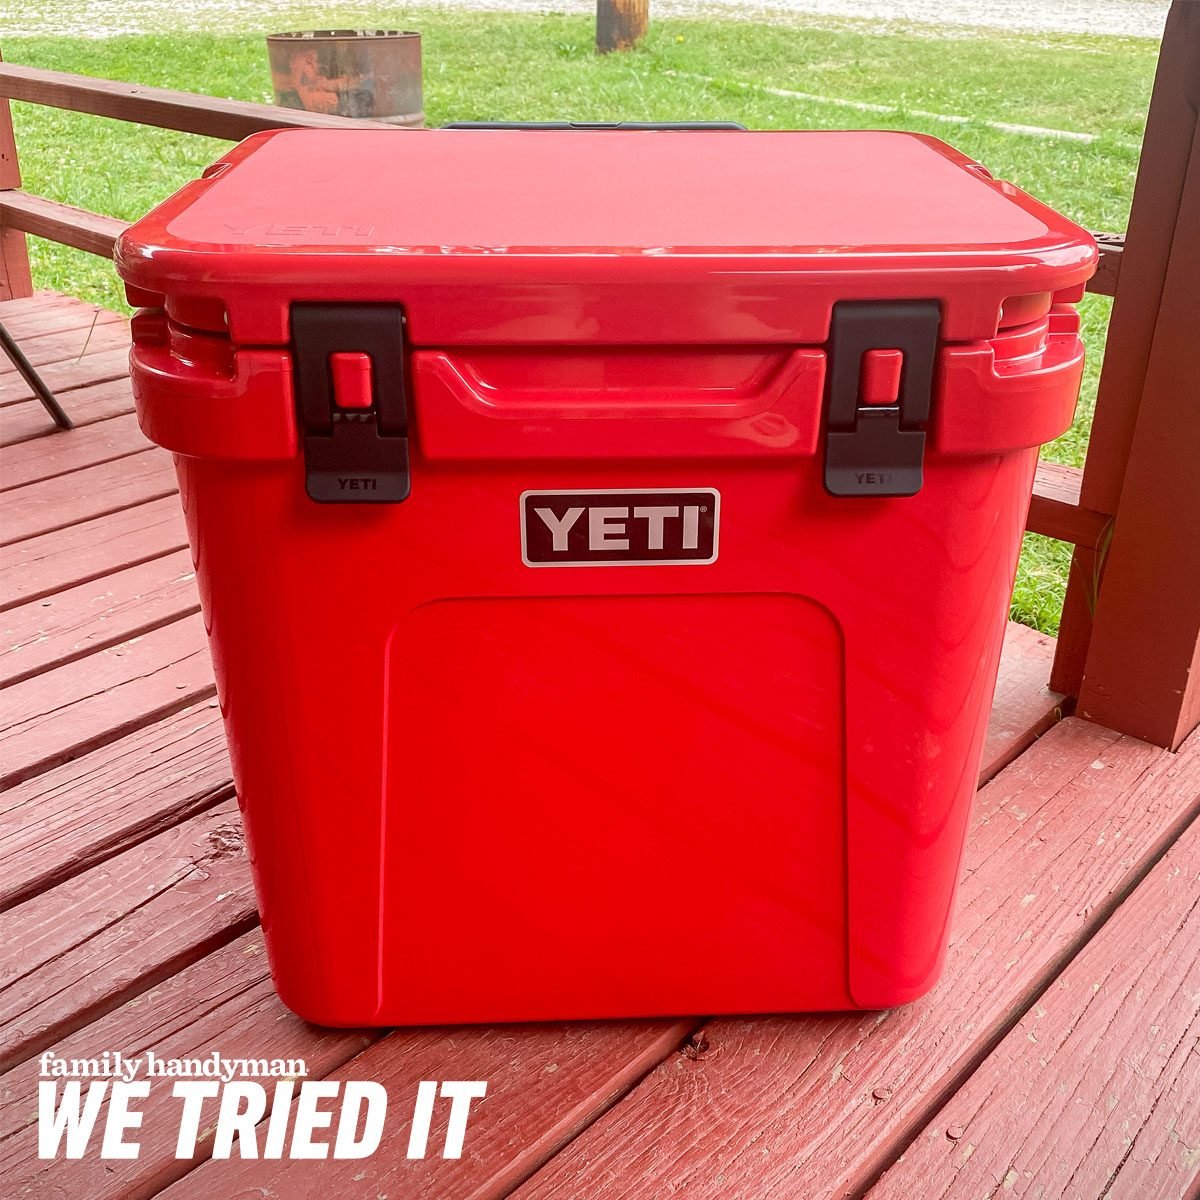 Review of the Yeti Roadie 48: A Tall, Durable, and Rollable Cooler (We Tried it!)